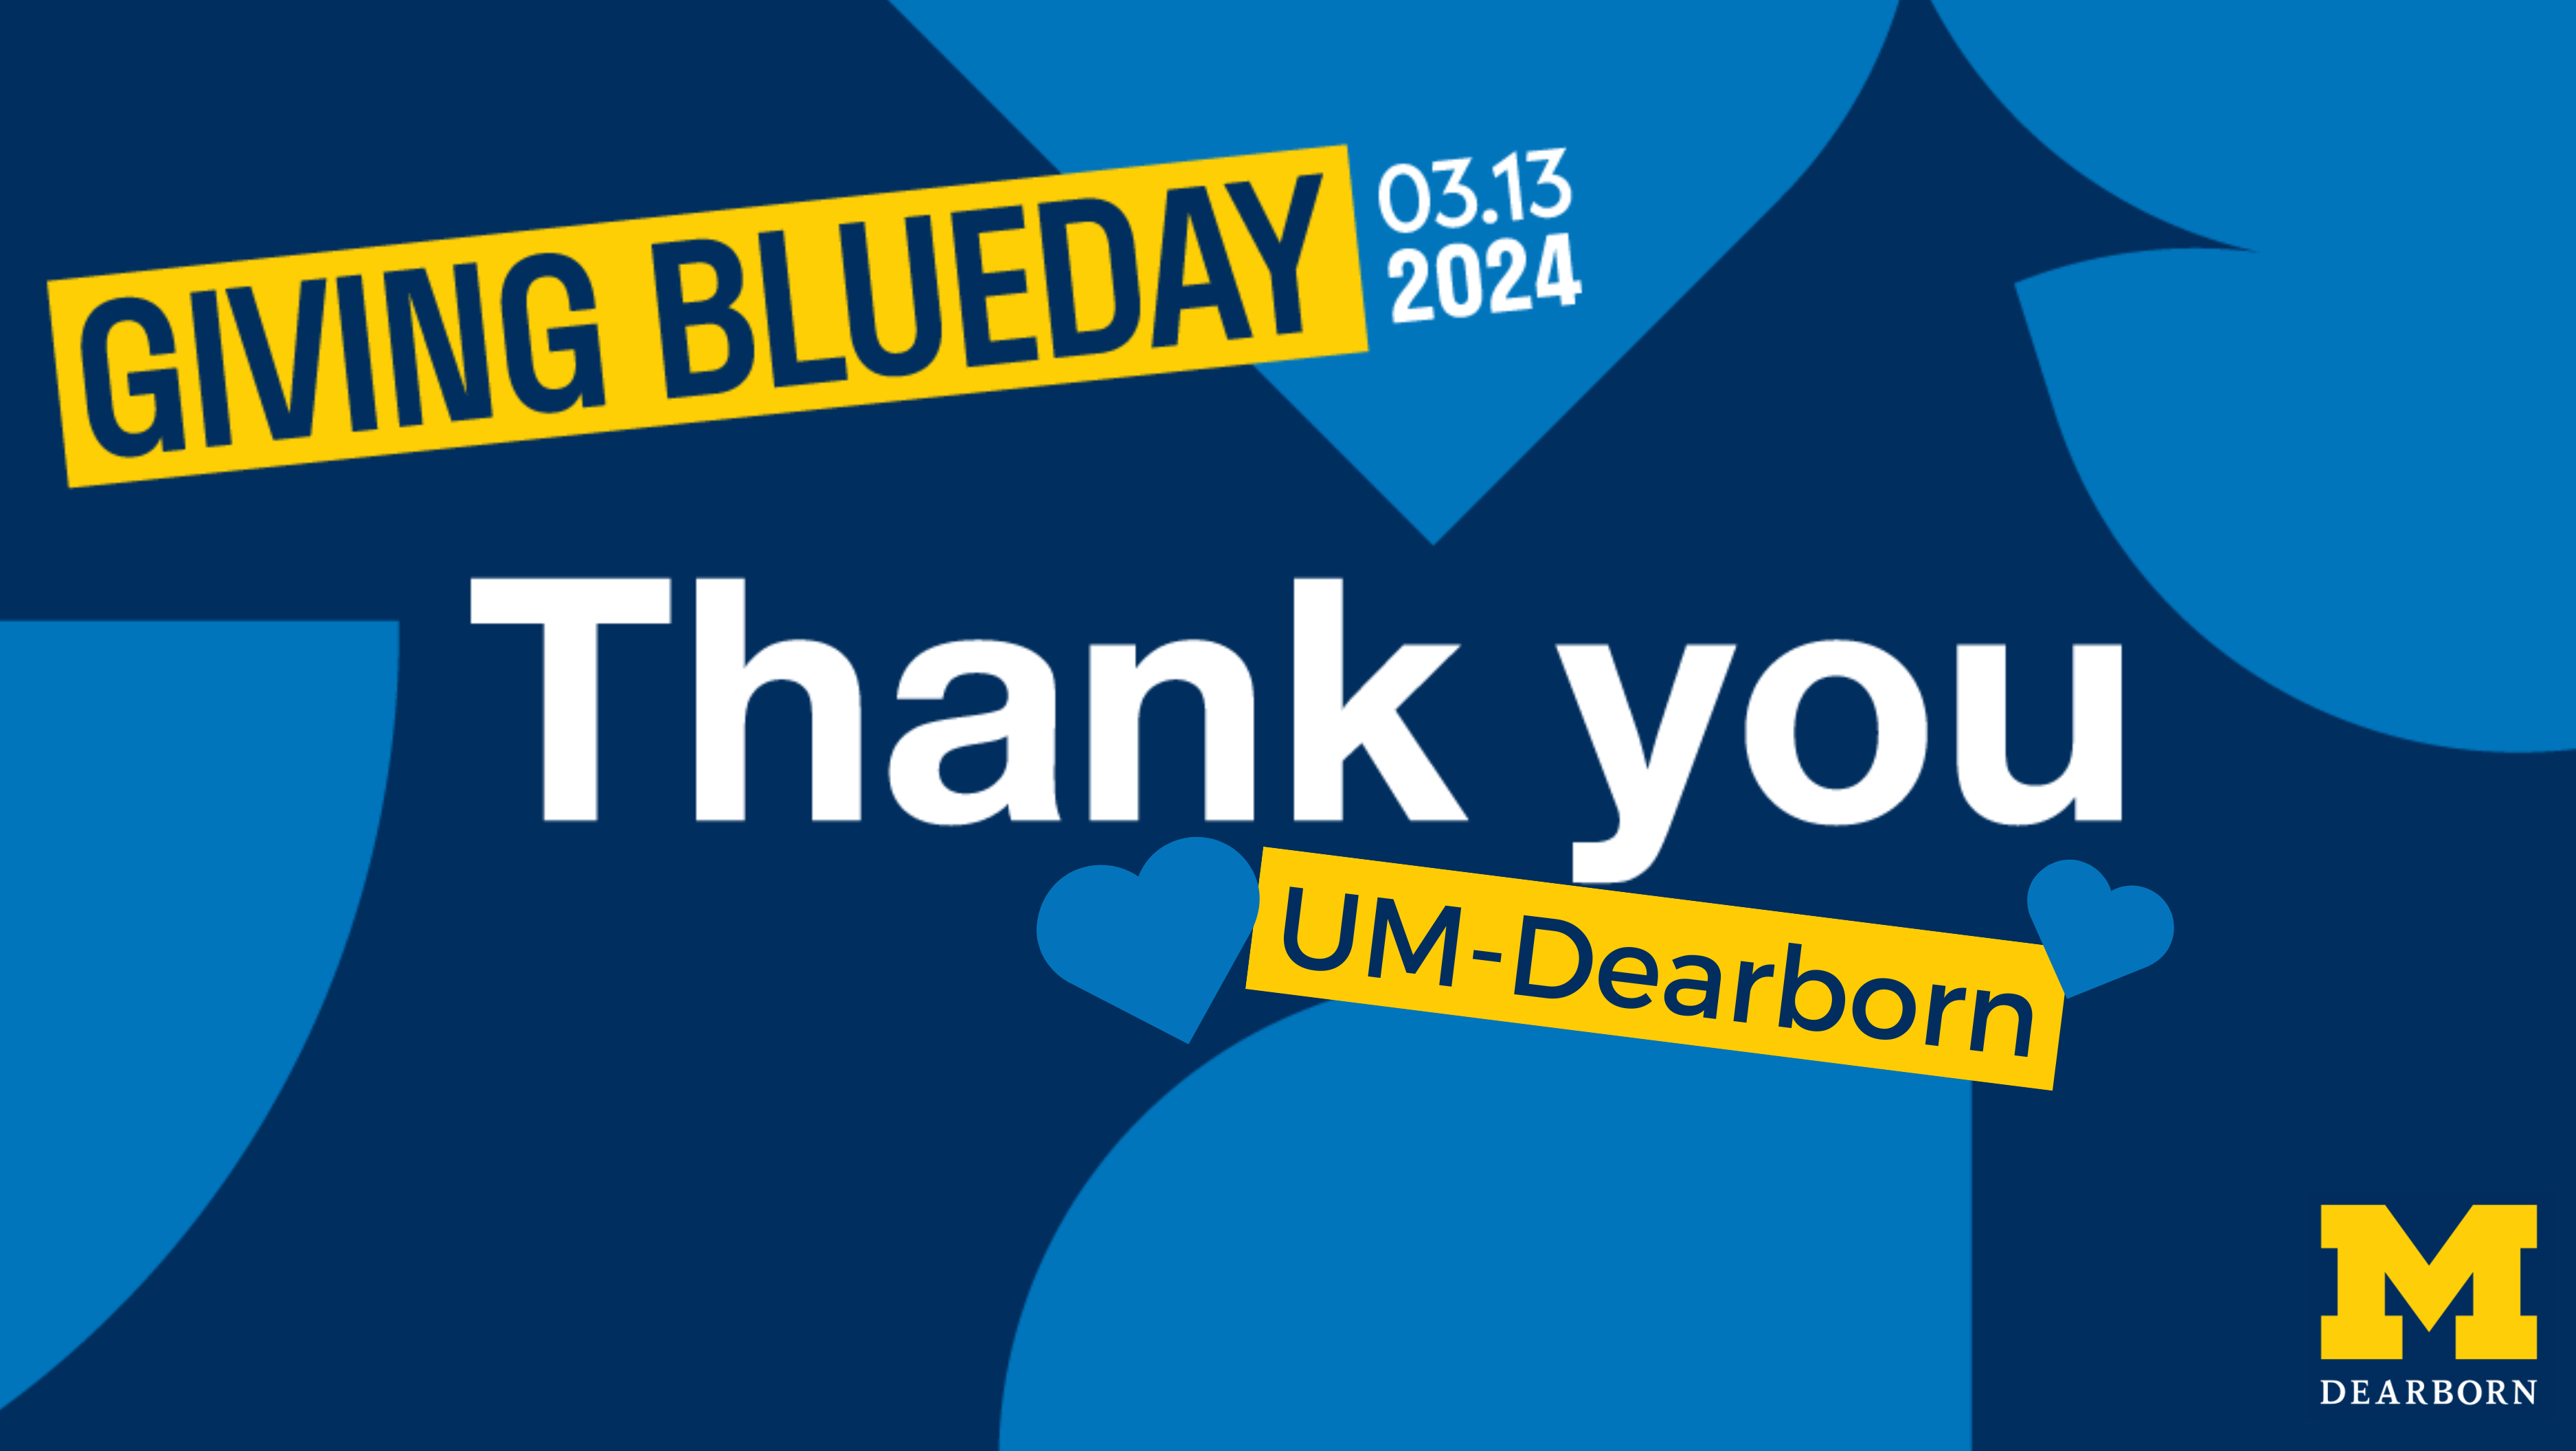 Givng Blueday 2024: Thank you